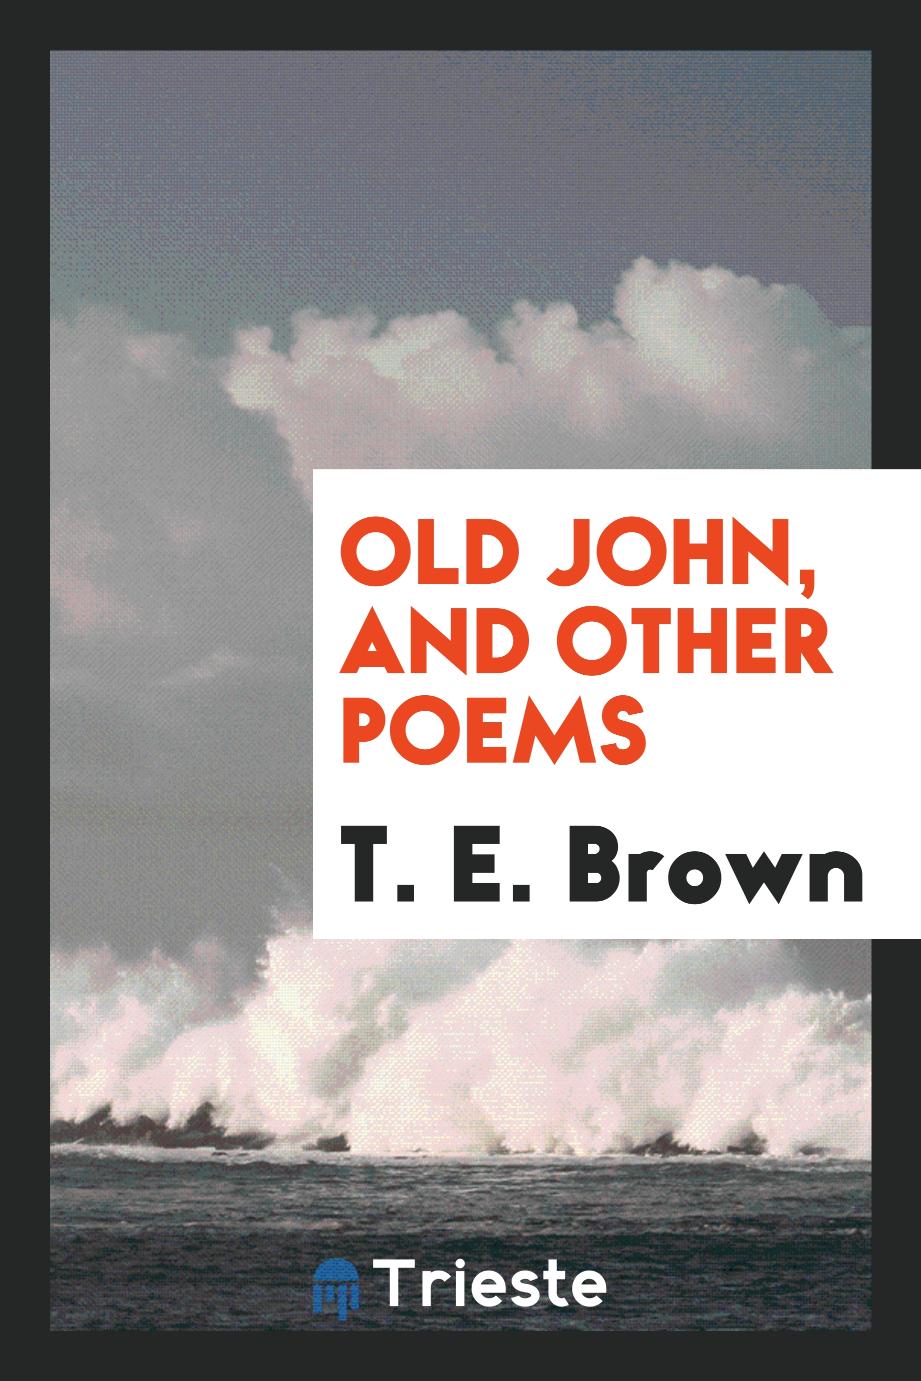 Old John, and other poems